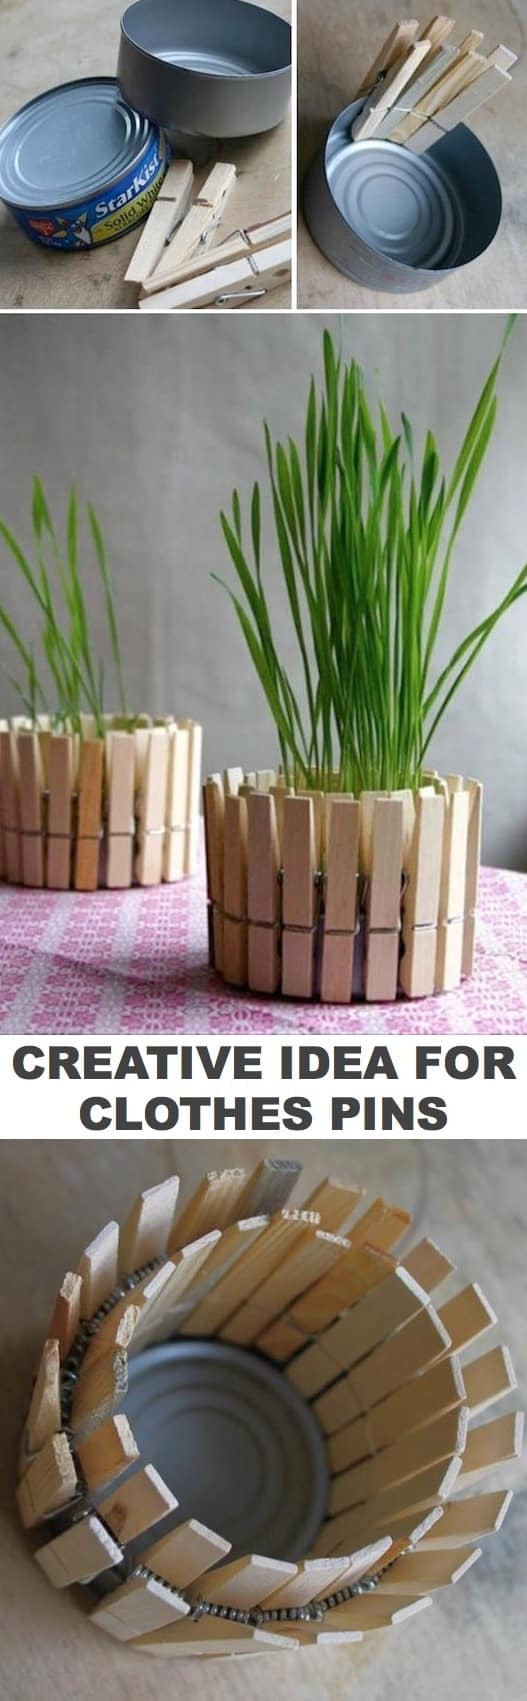 Easy Craft Ideas For Adults
 30 Easy Craft Ideas That Will Spark Your Creativity DIY